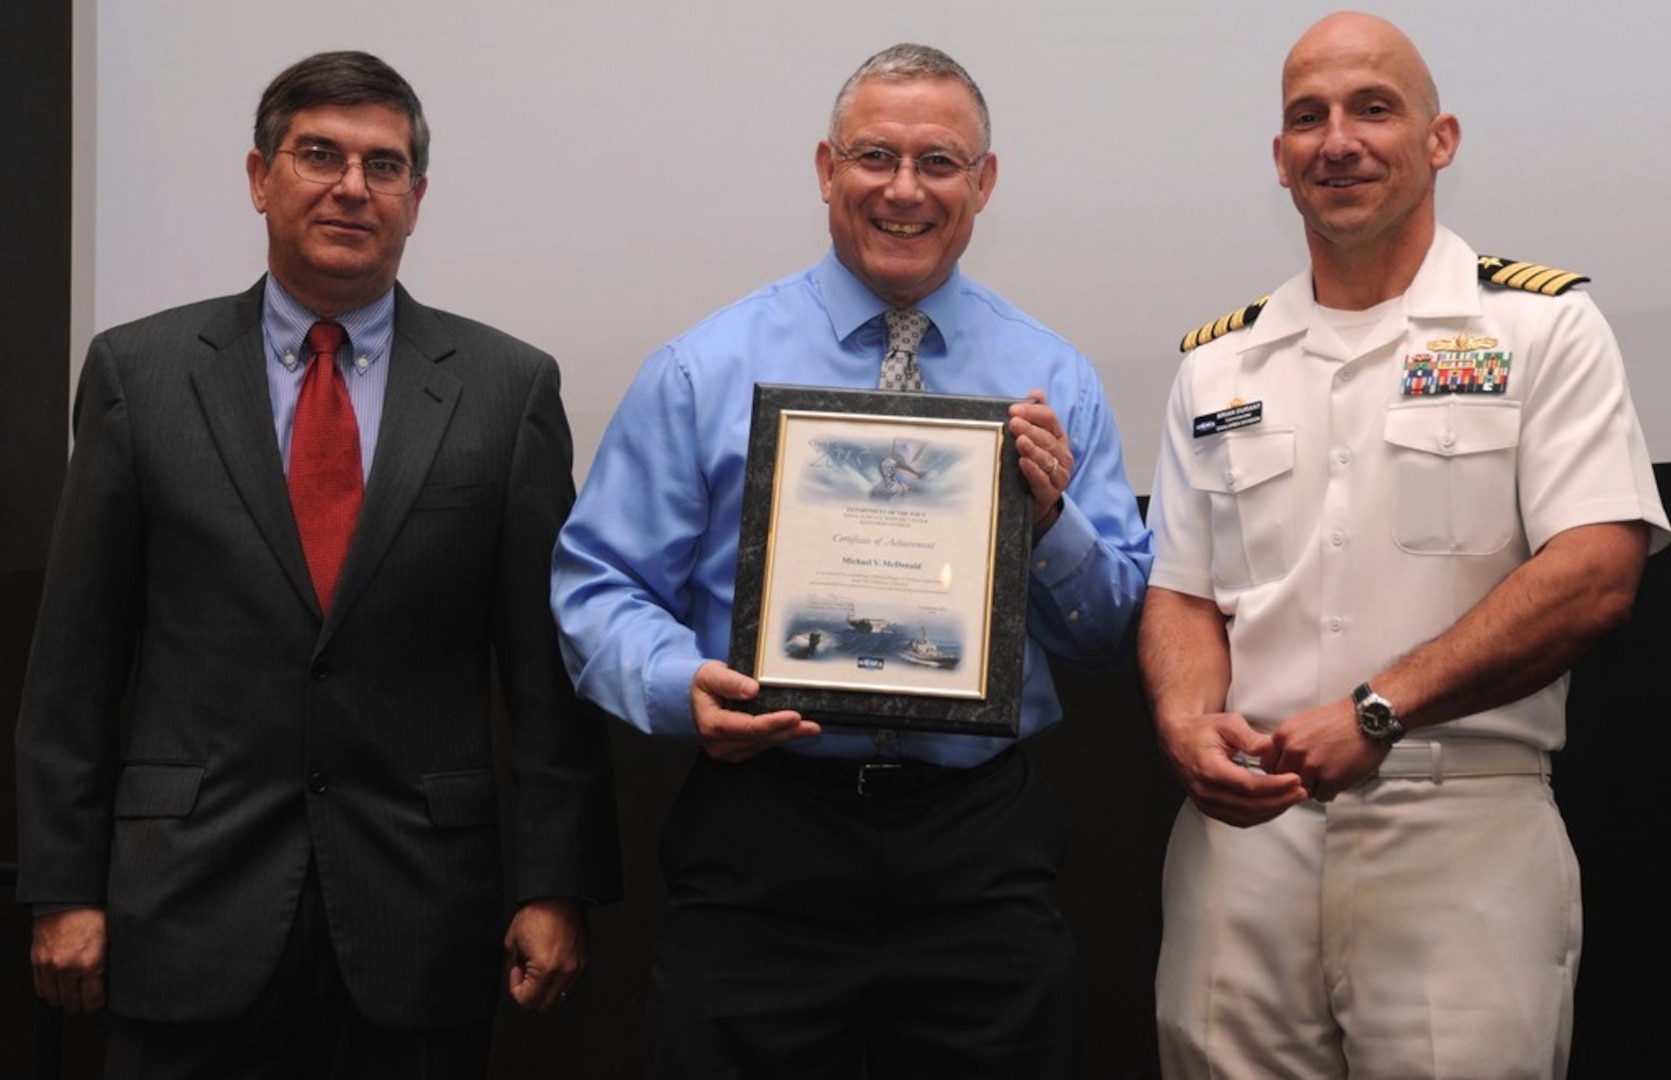 DAHLGREN, Va. - Mike McDonald receives his certificate of achievement from Naval Surface Warfare Center Dahlgren Division (NSWCDD) Technical Director Dennis McLaughlin and NSWCDD Commanding Officer Capt. Brian Durant at the annual command academic awards ceremony, Sept. 21. The NSWCDD engineer - and his wife, Janette Calo - were recognized for completing a master's degree in systems engineering  and commended for commitment to their personal and professional development. 